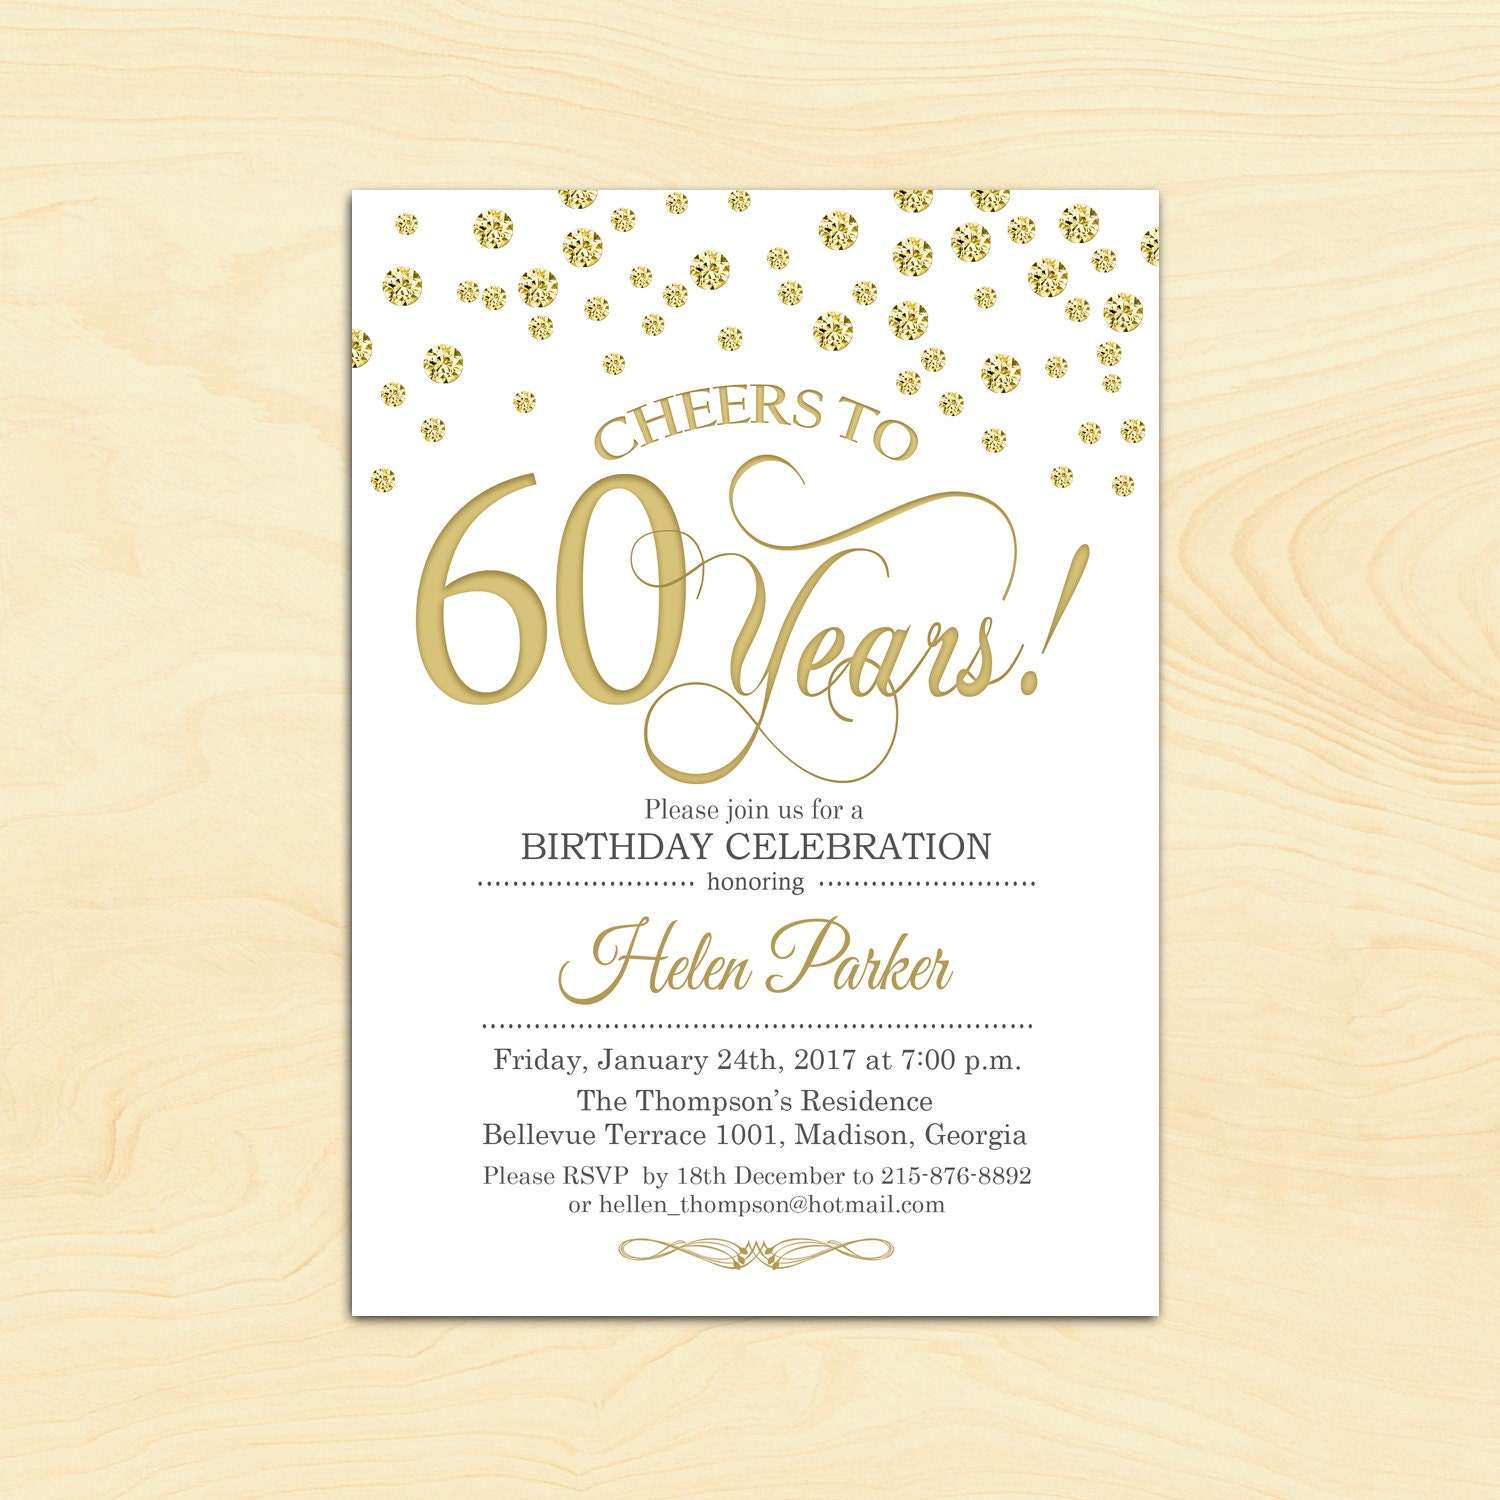 60th Birthday Invitation. Any Age. Cheers to 60 Years. Gold